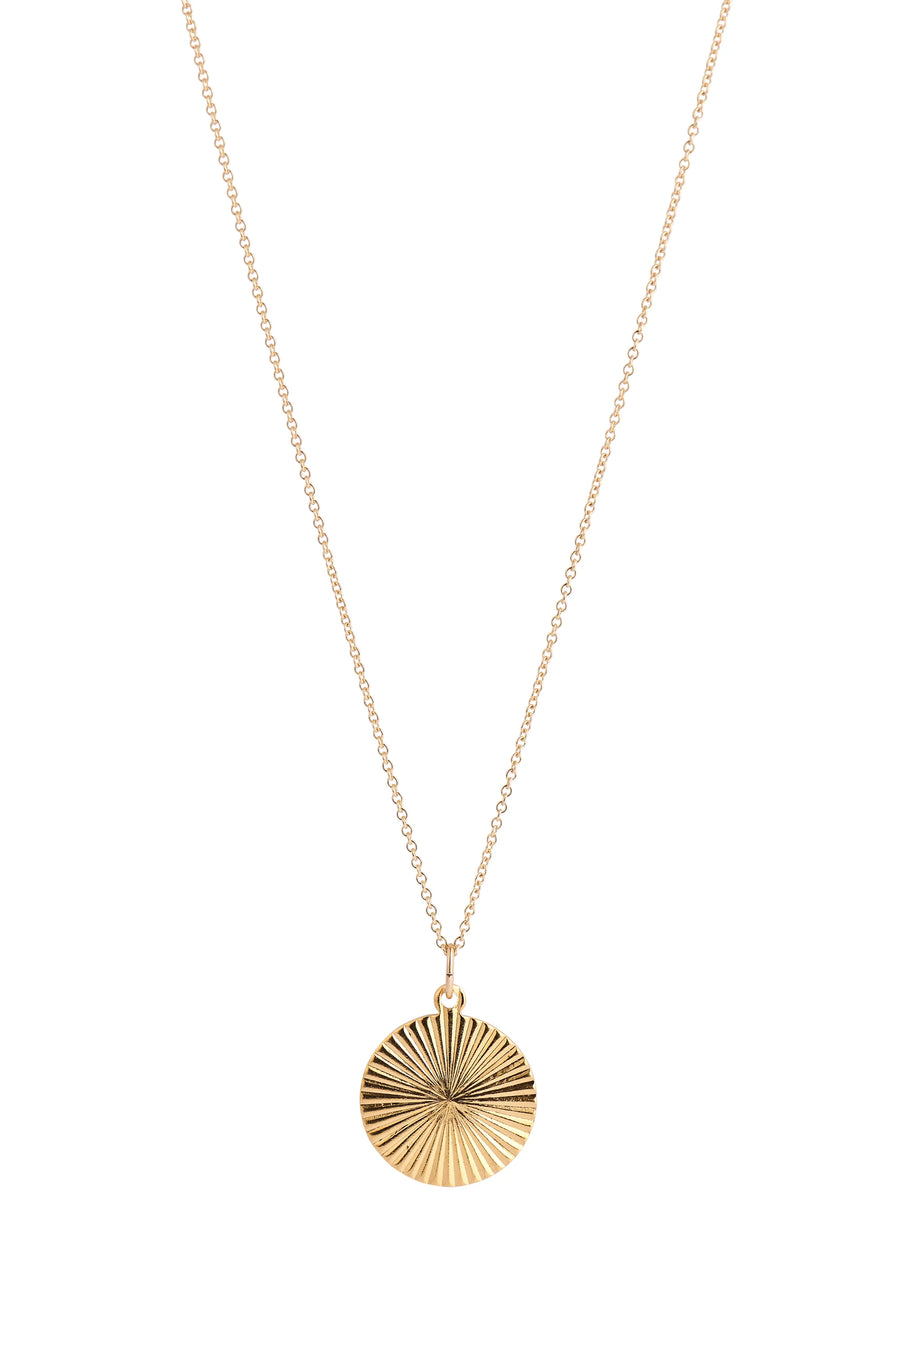 LISBETH JEWELRY - STARDUST NECKLACE - 14K GOLD FILLED